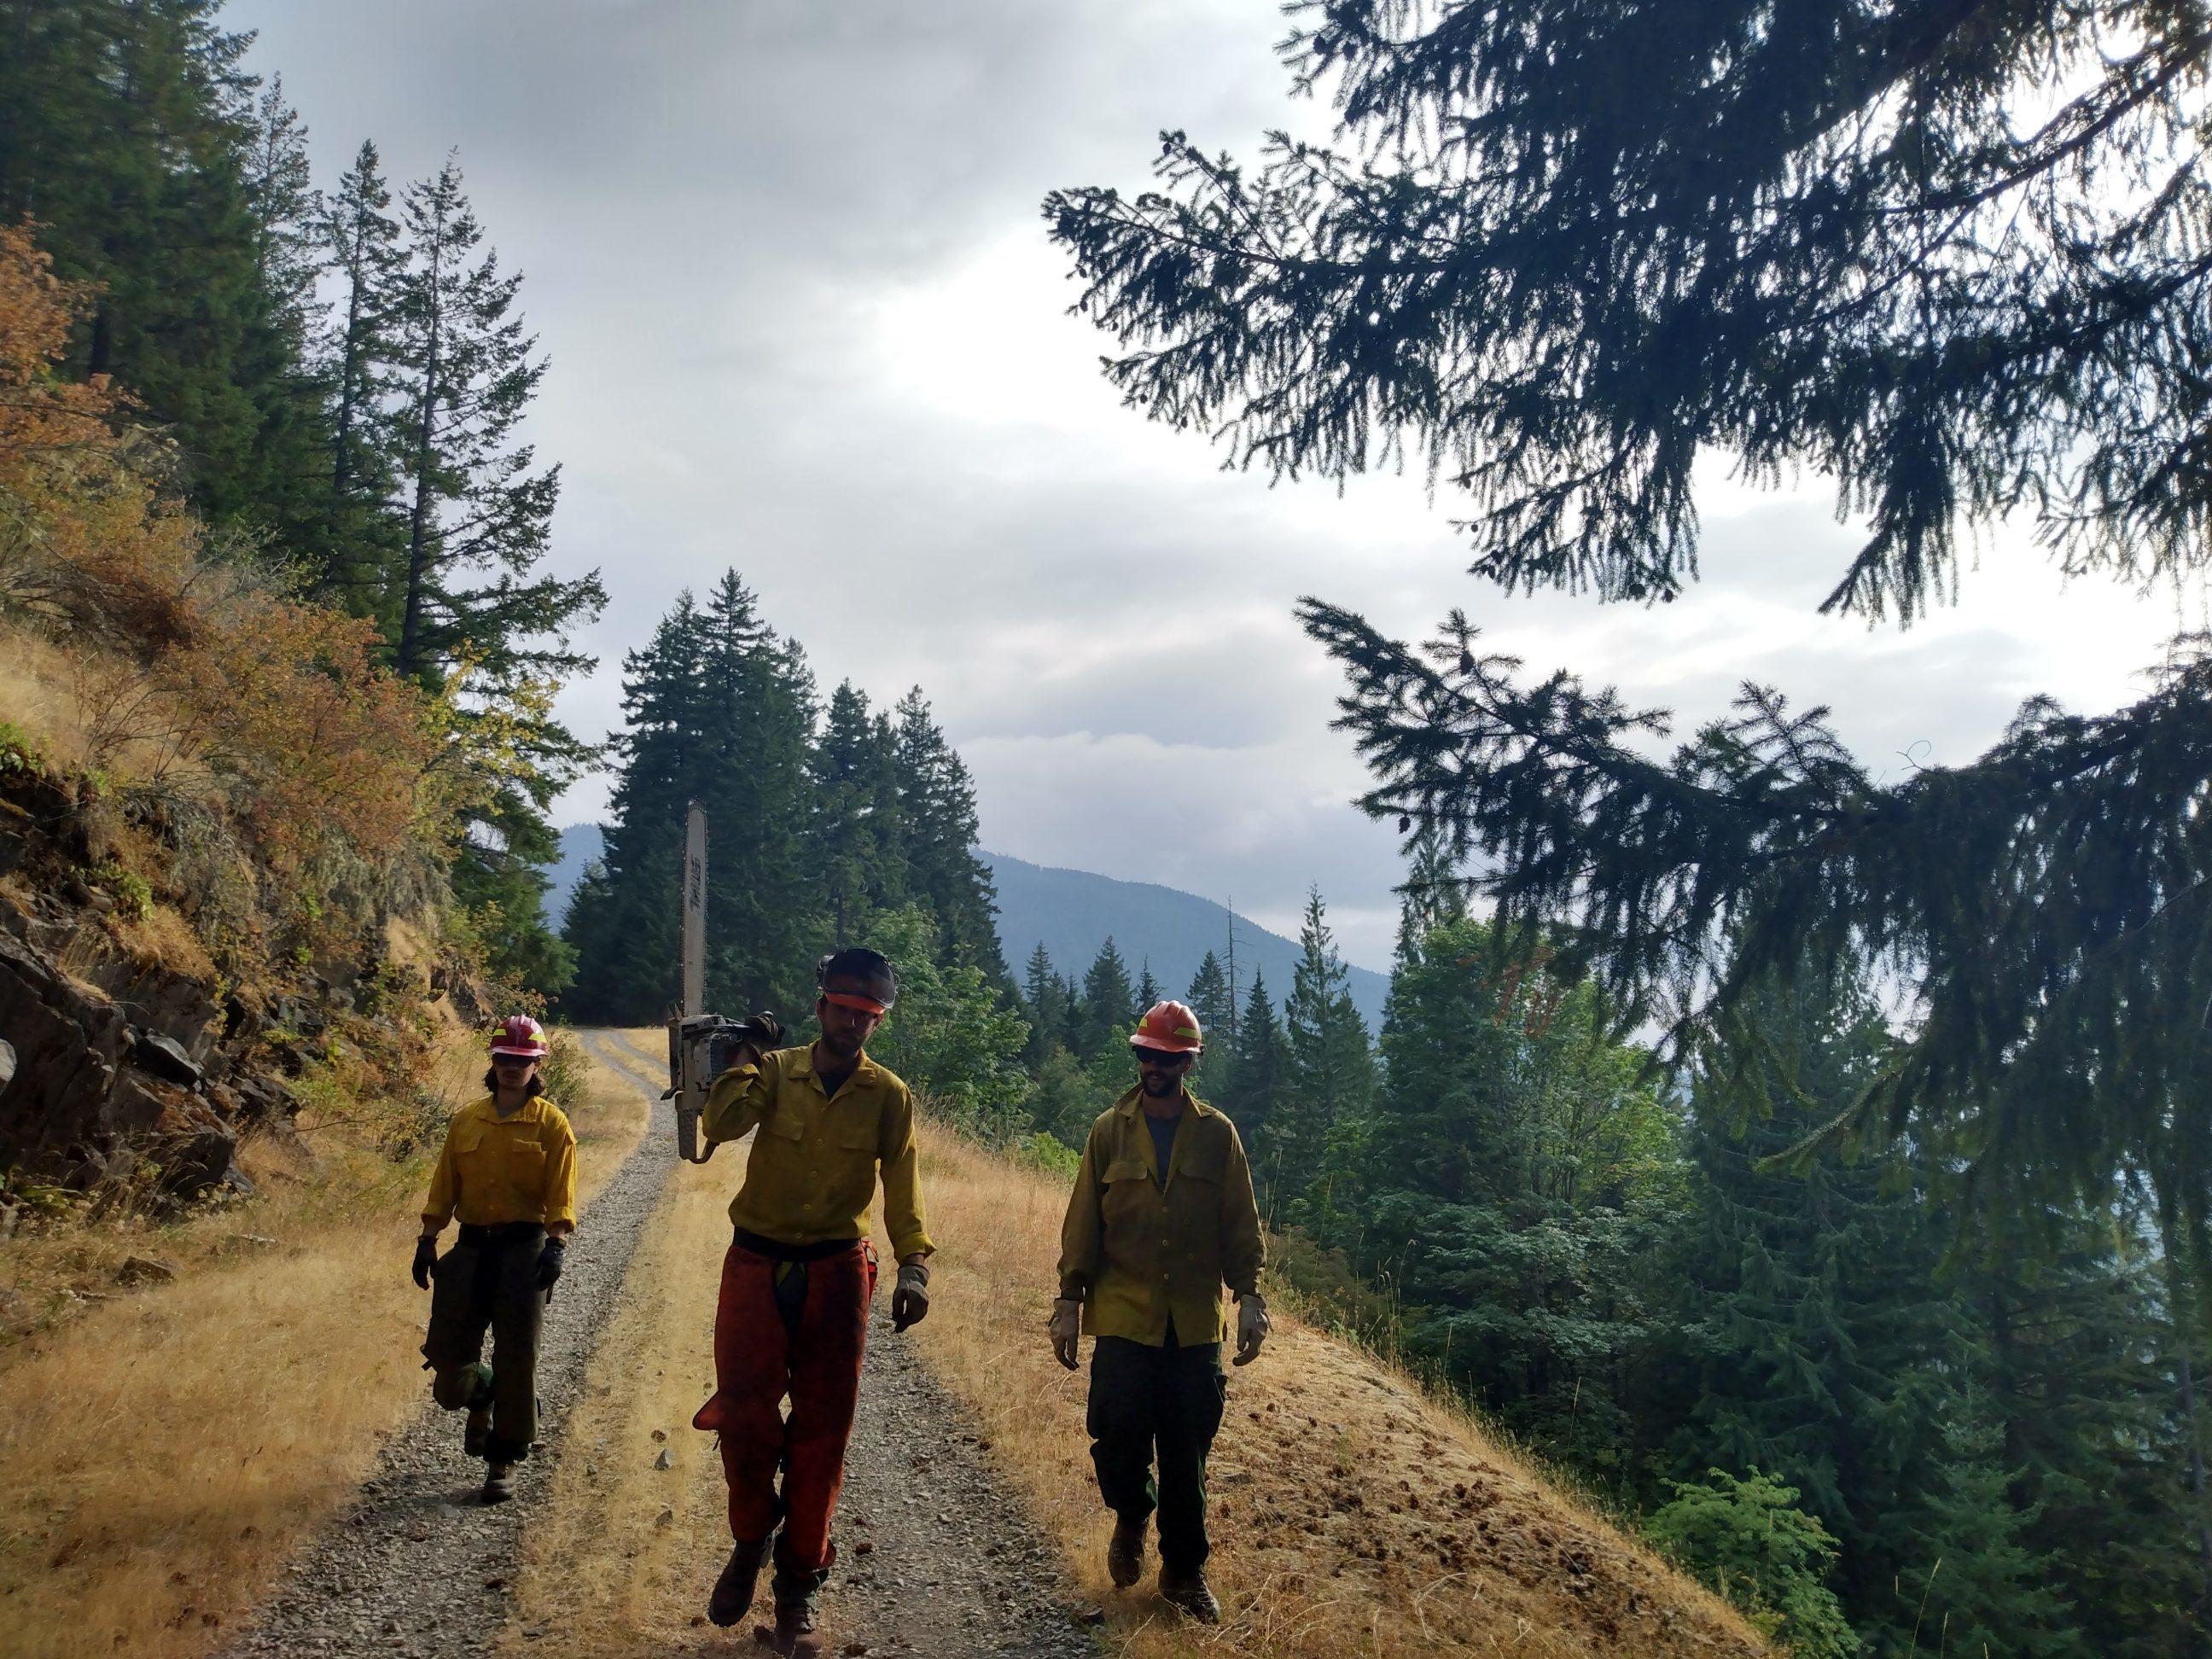 Three firefighters walk on a road cut across a steep, forested slope. One is carrying a chainsaw, used to cut brush along the road.